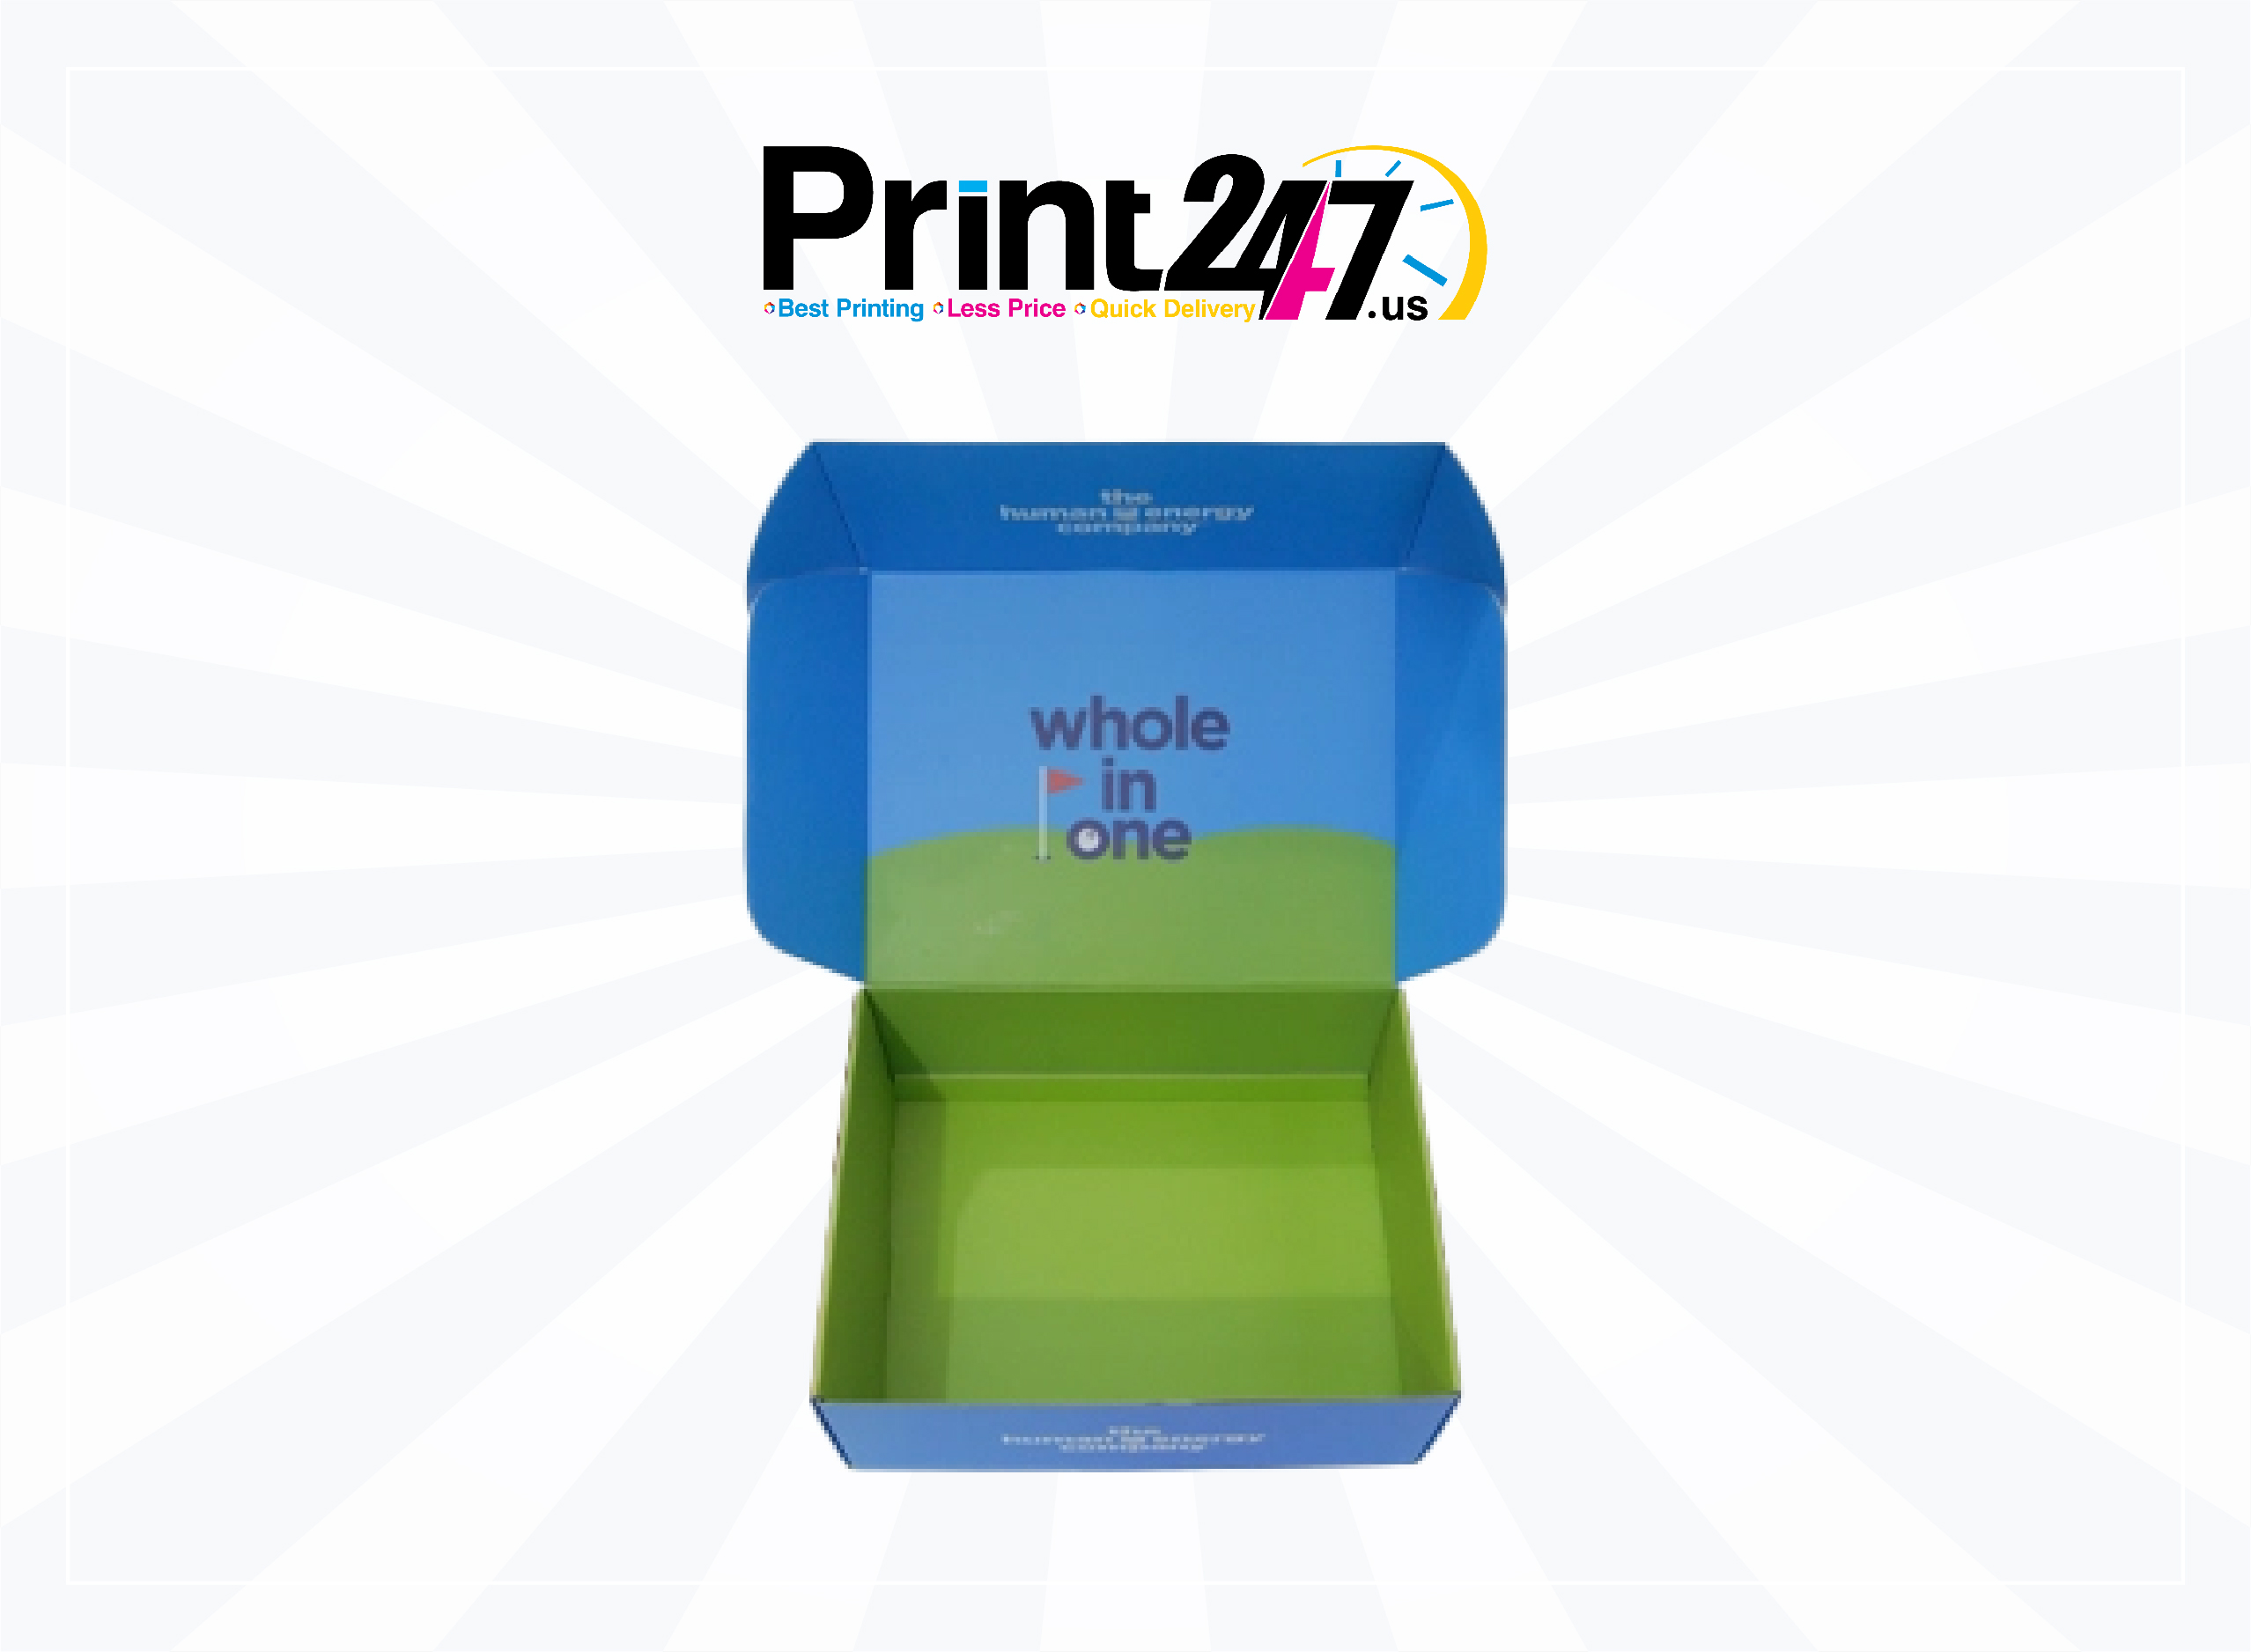 Elevate Your Brand with Custom Mailer Boxes from Print247